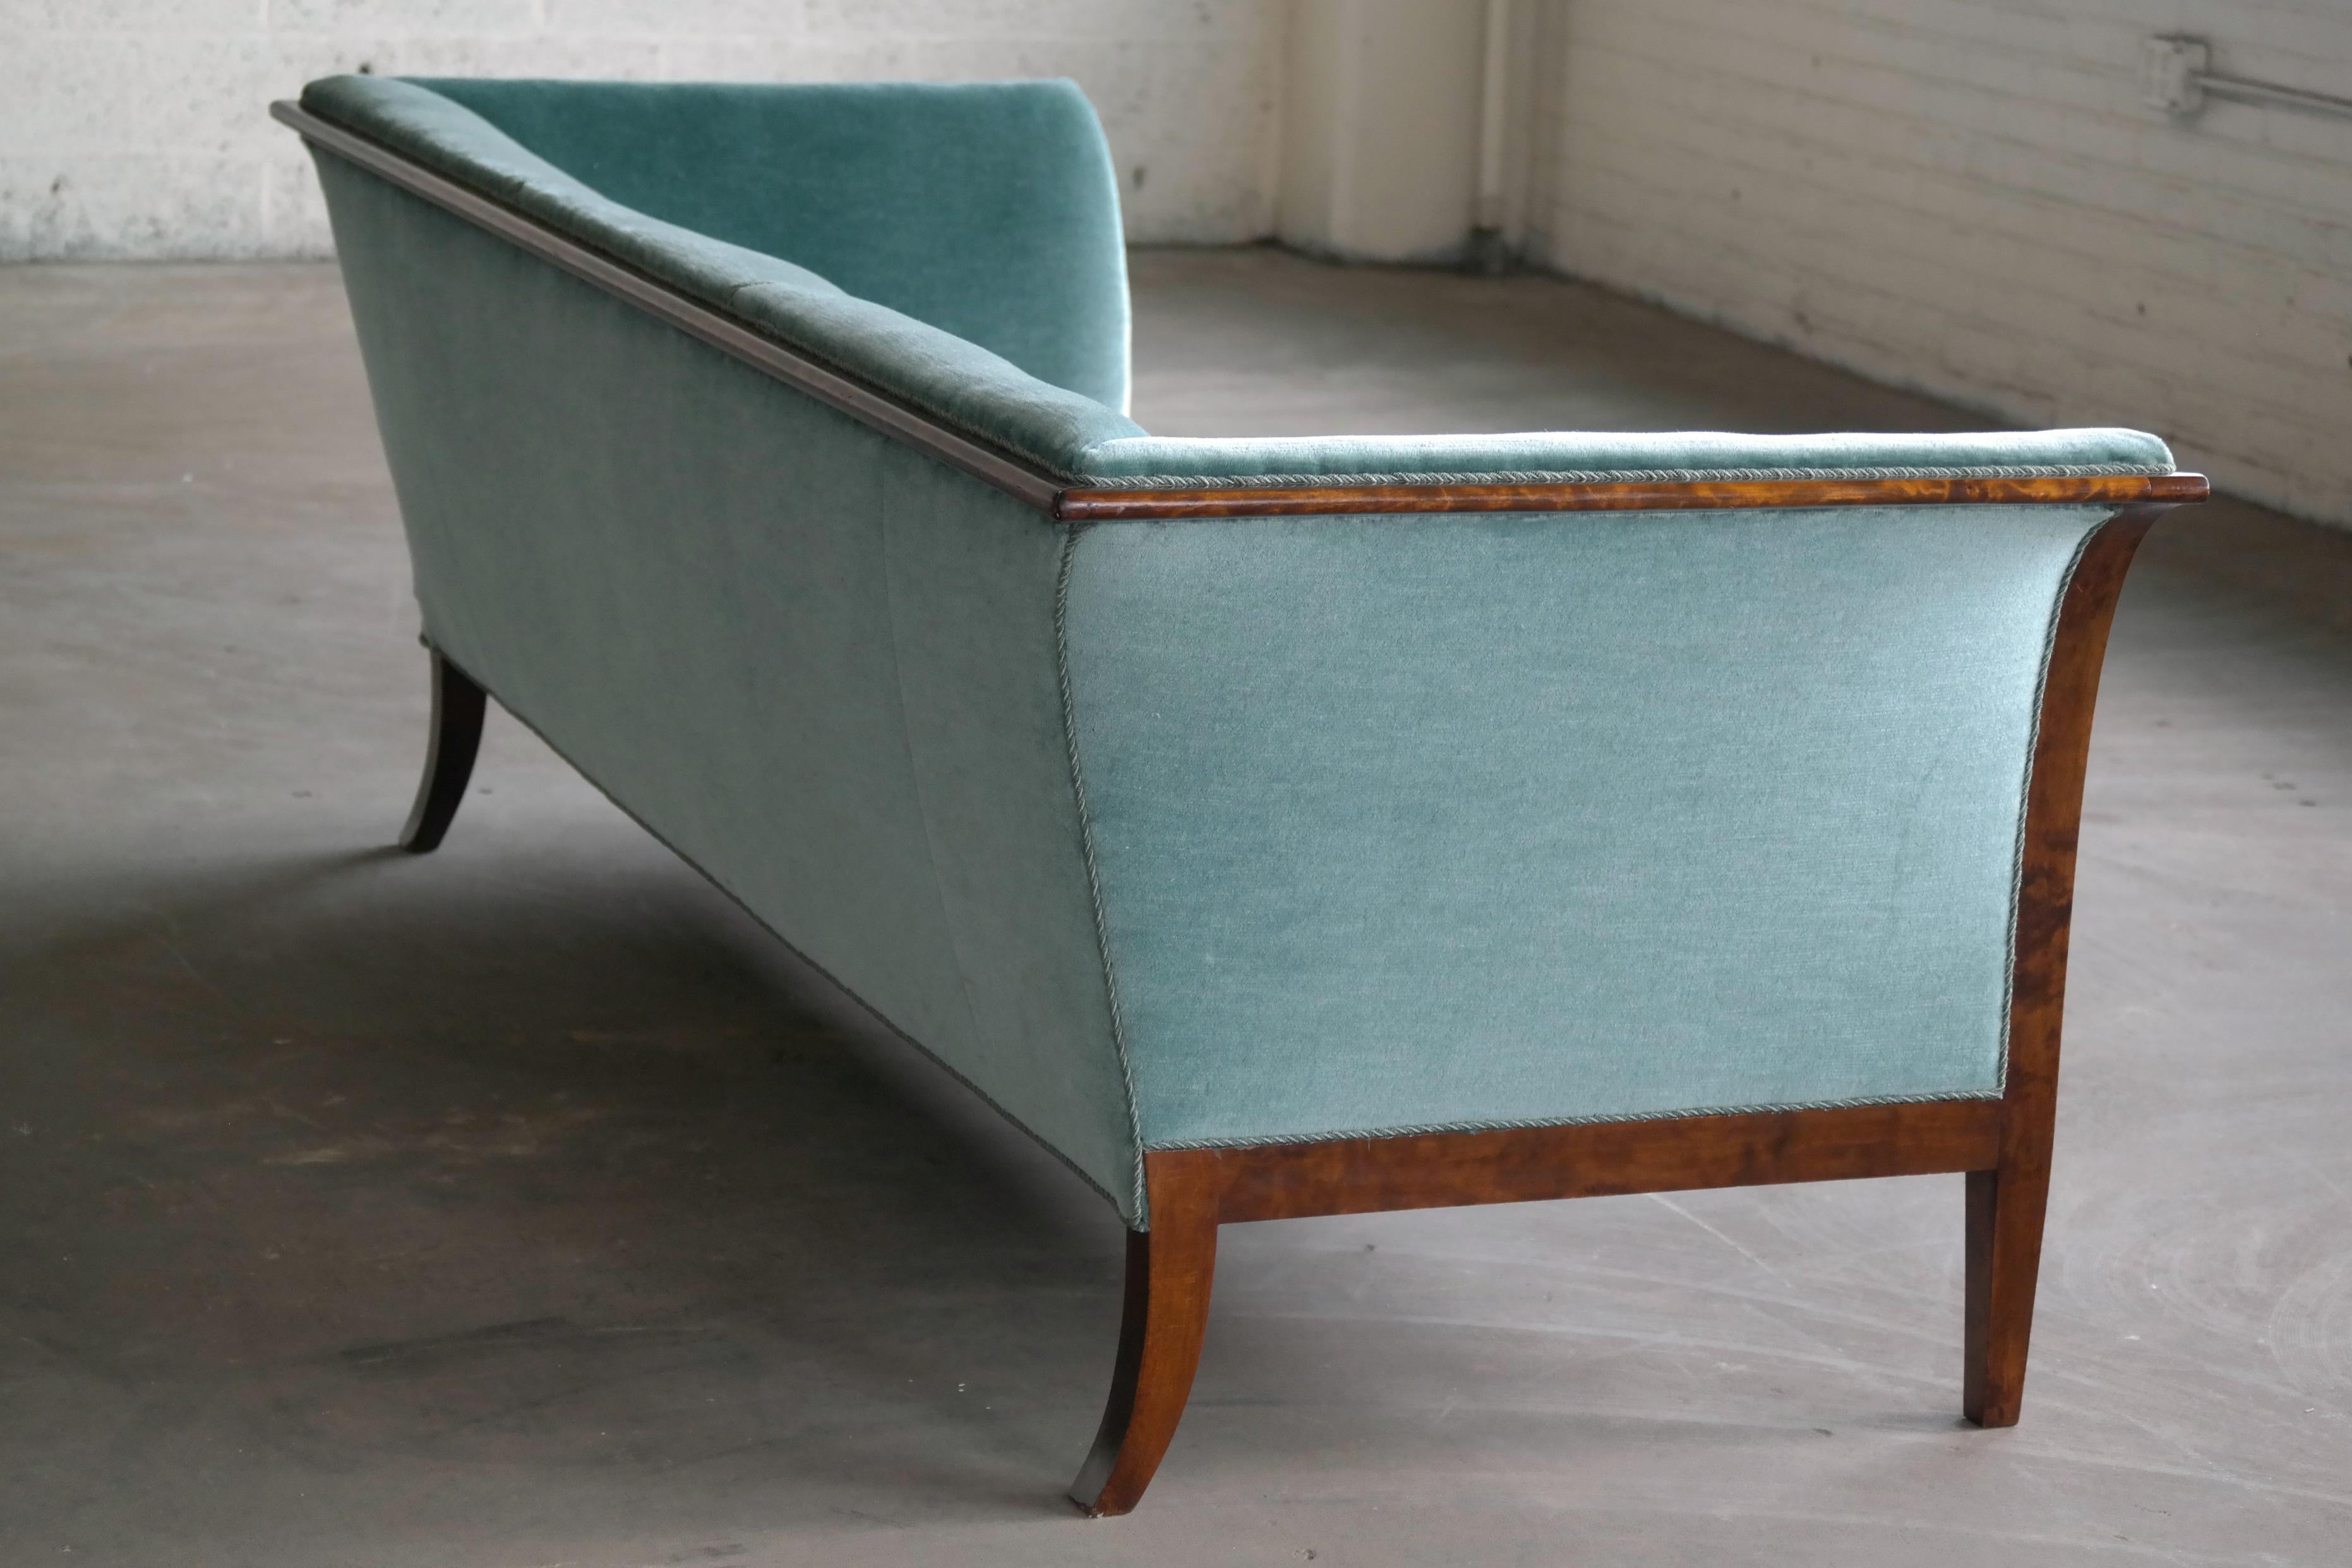 Frits Henningsen Classic Sofa in Flamed Birchwood with Original 1938 Invoice 2